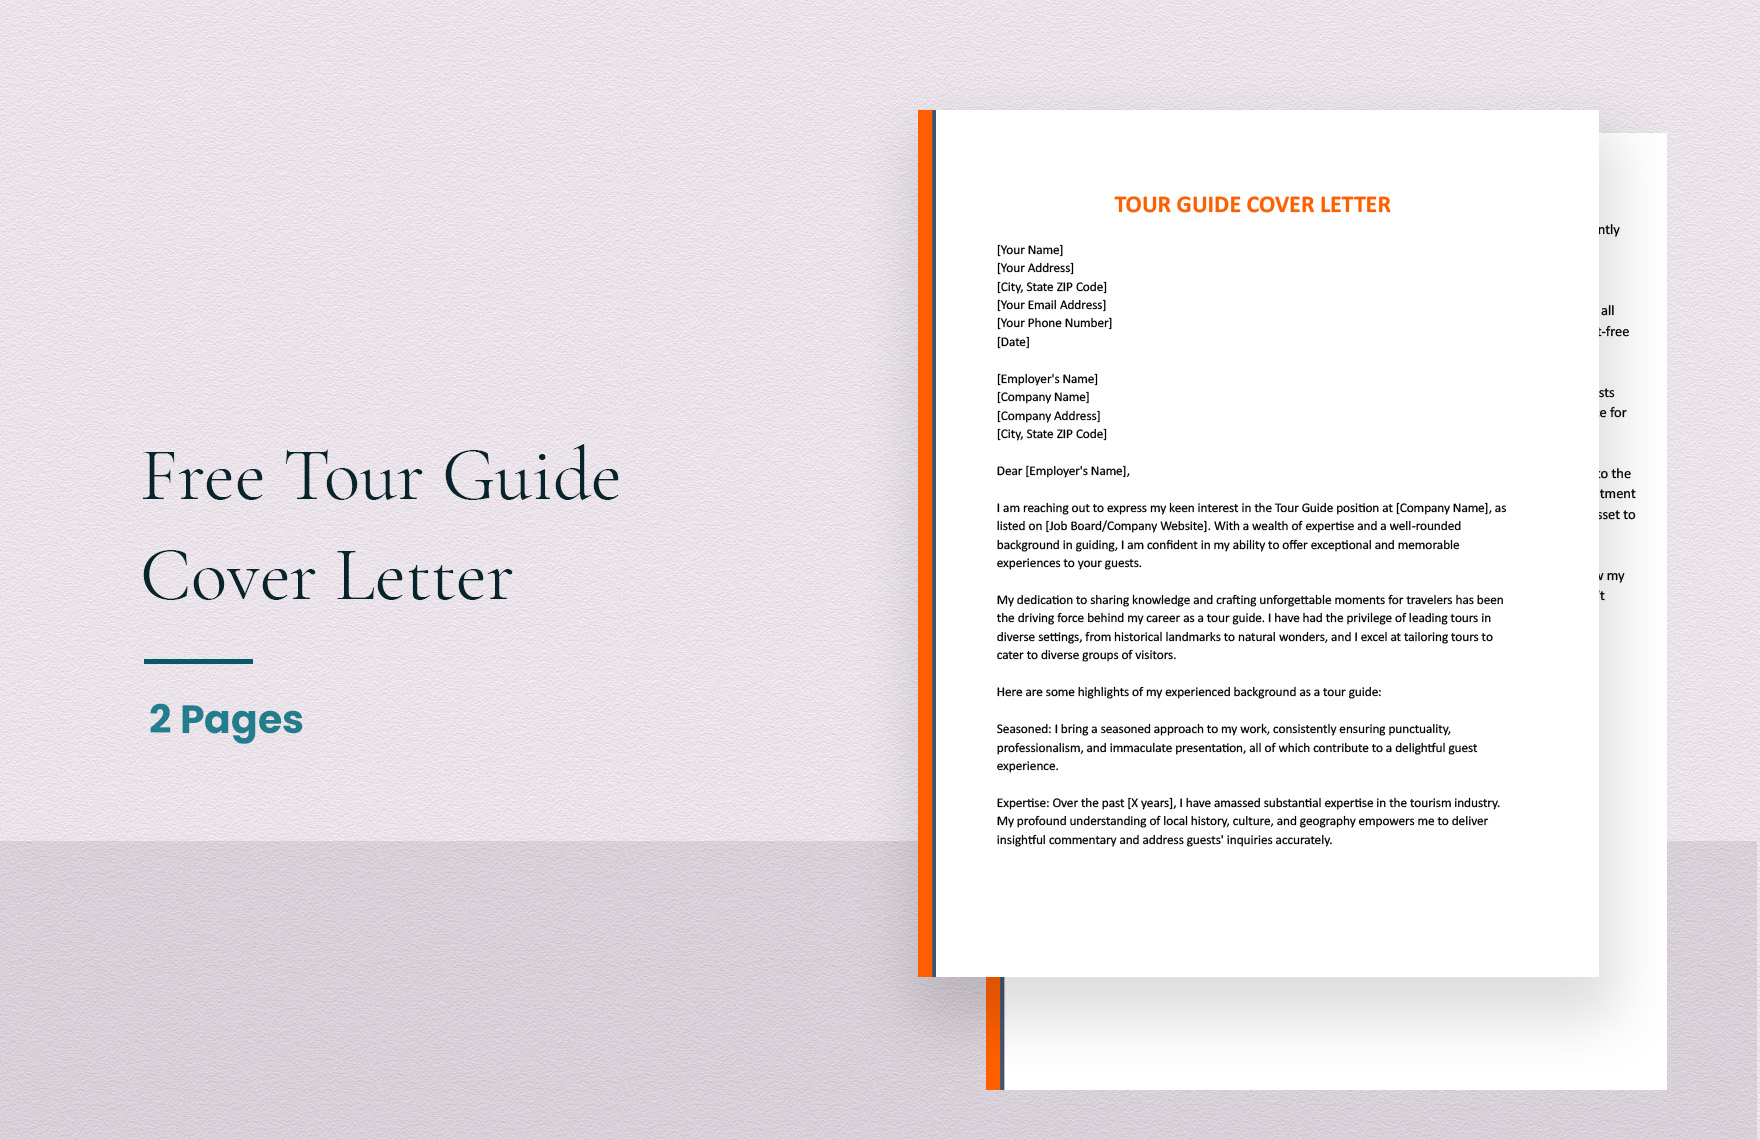 Tour Guide Cover Letter in Word, Google Docs